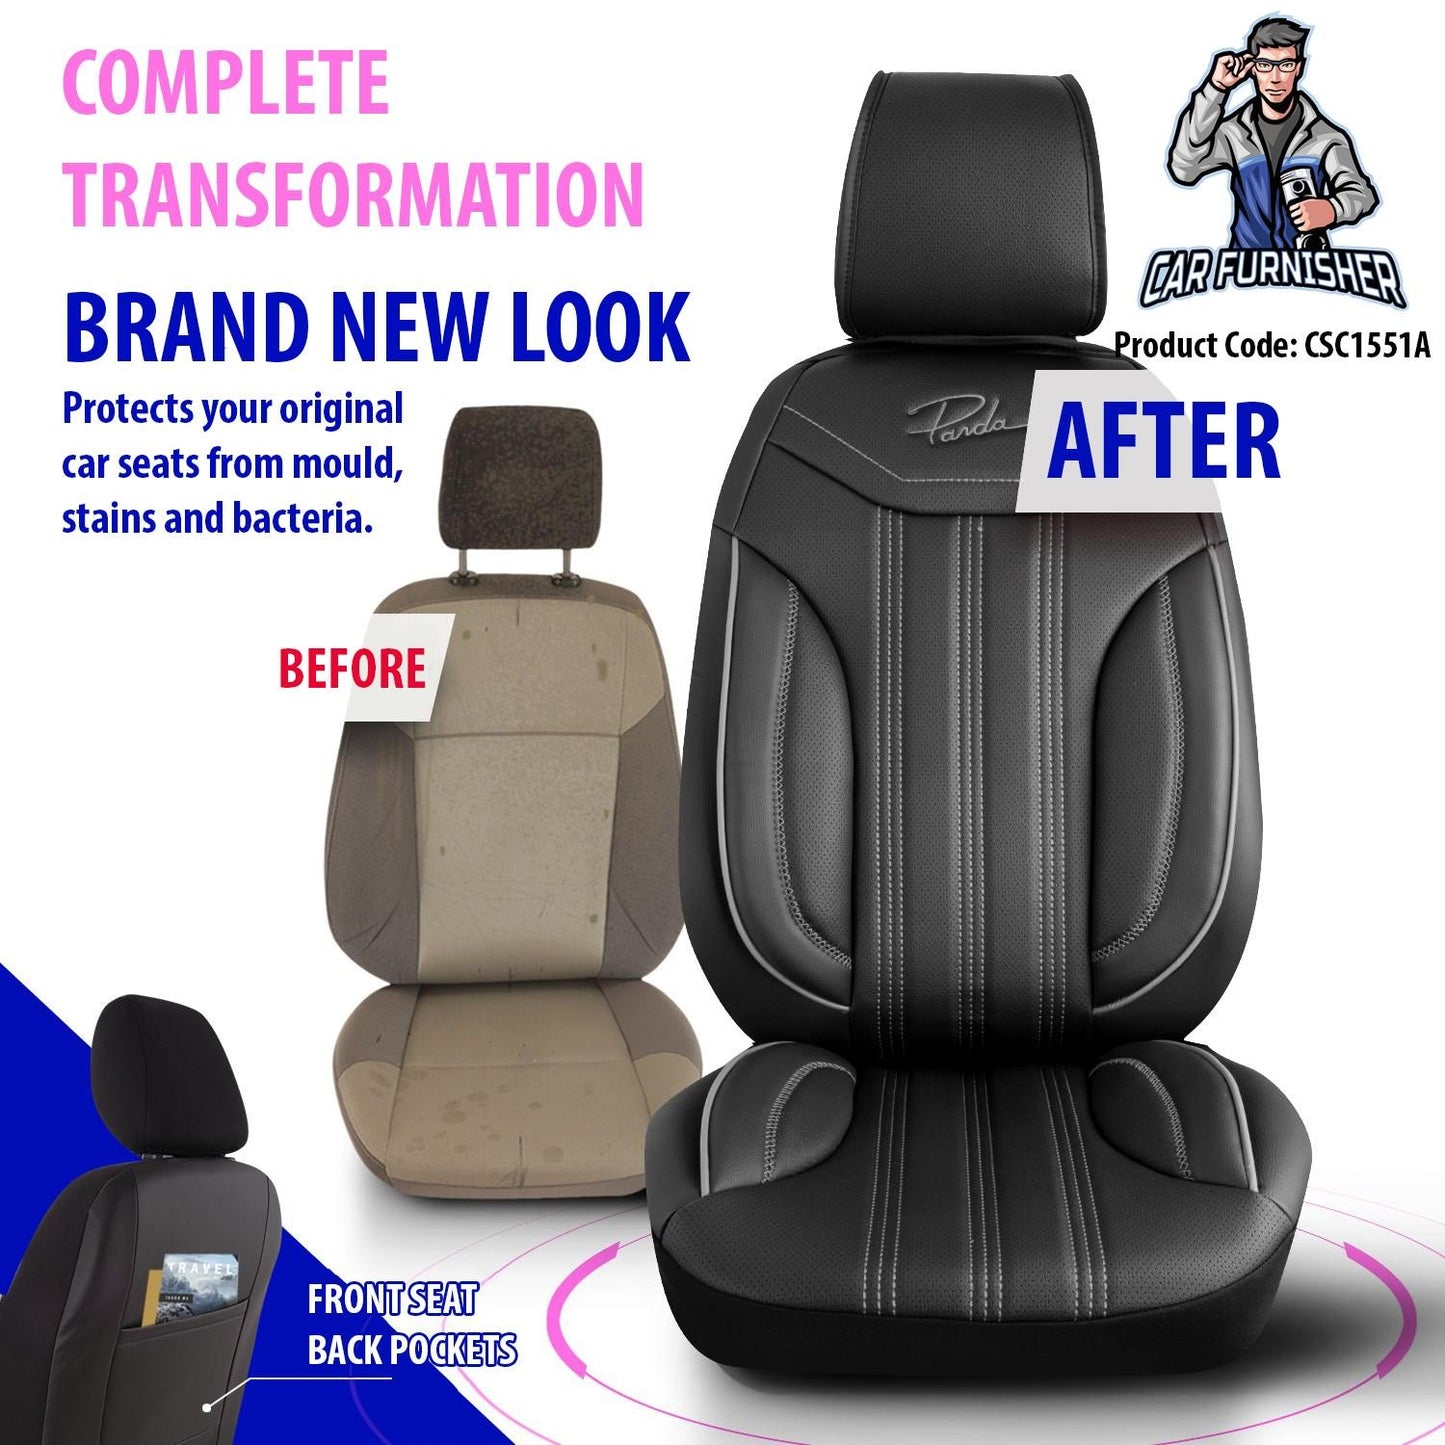 Luxury Car Seat Cover Set (5 Colors) | Miami Series Black Full Leather